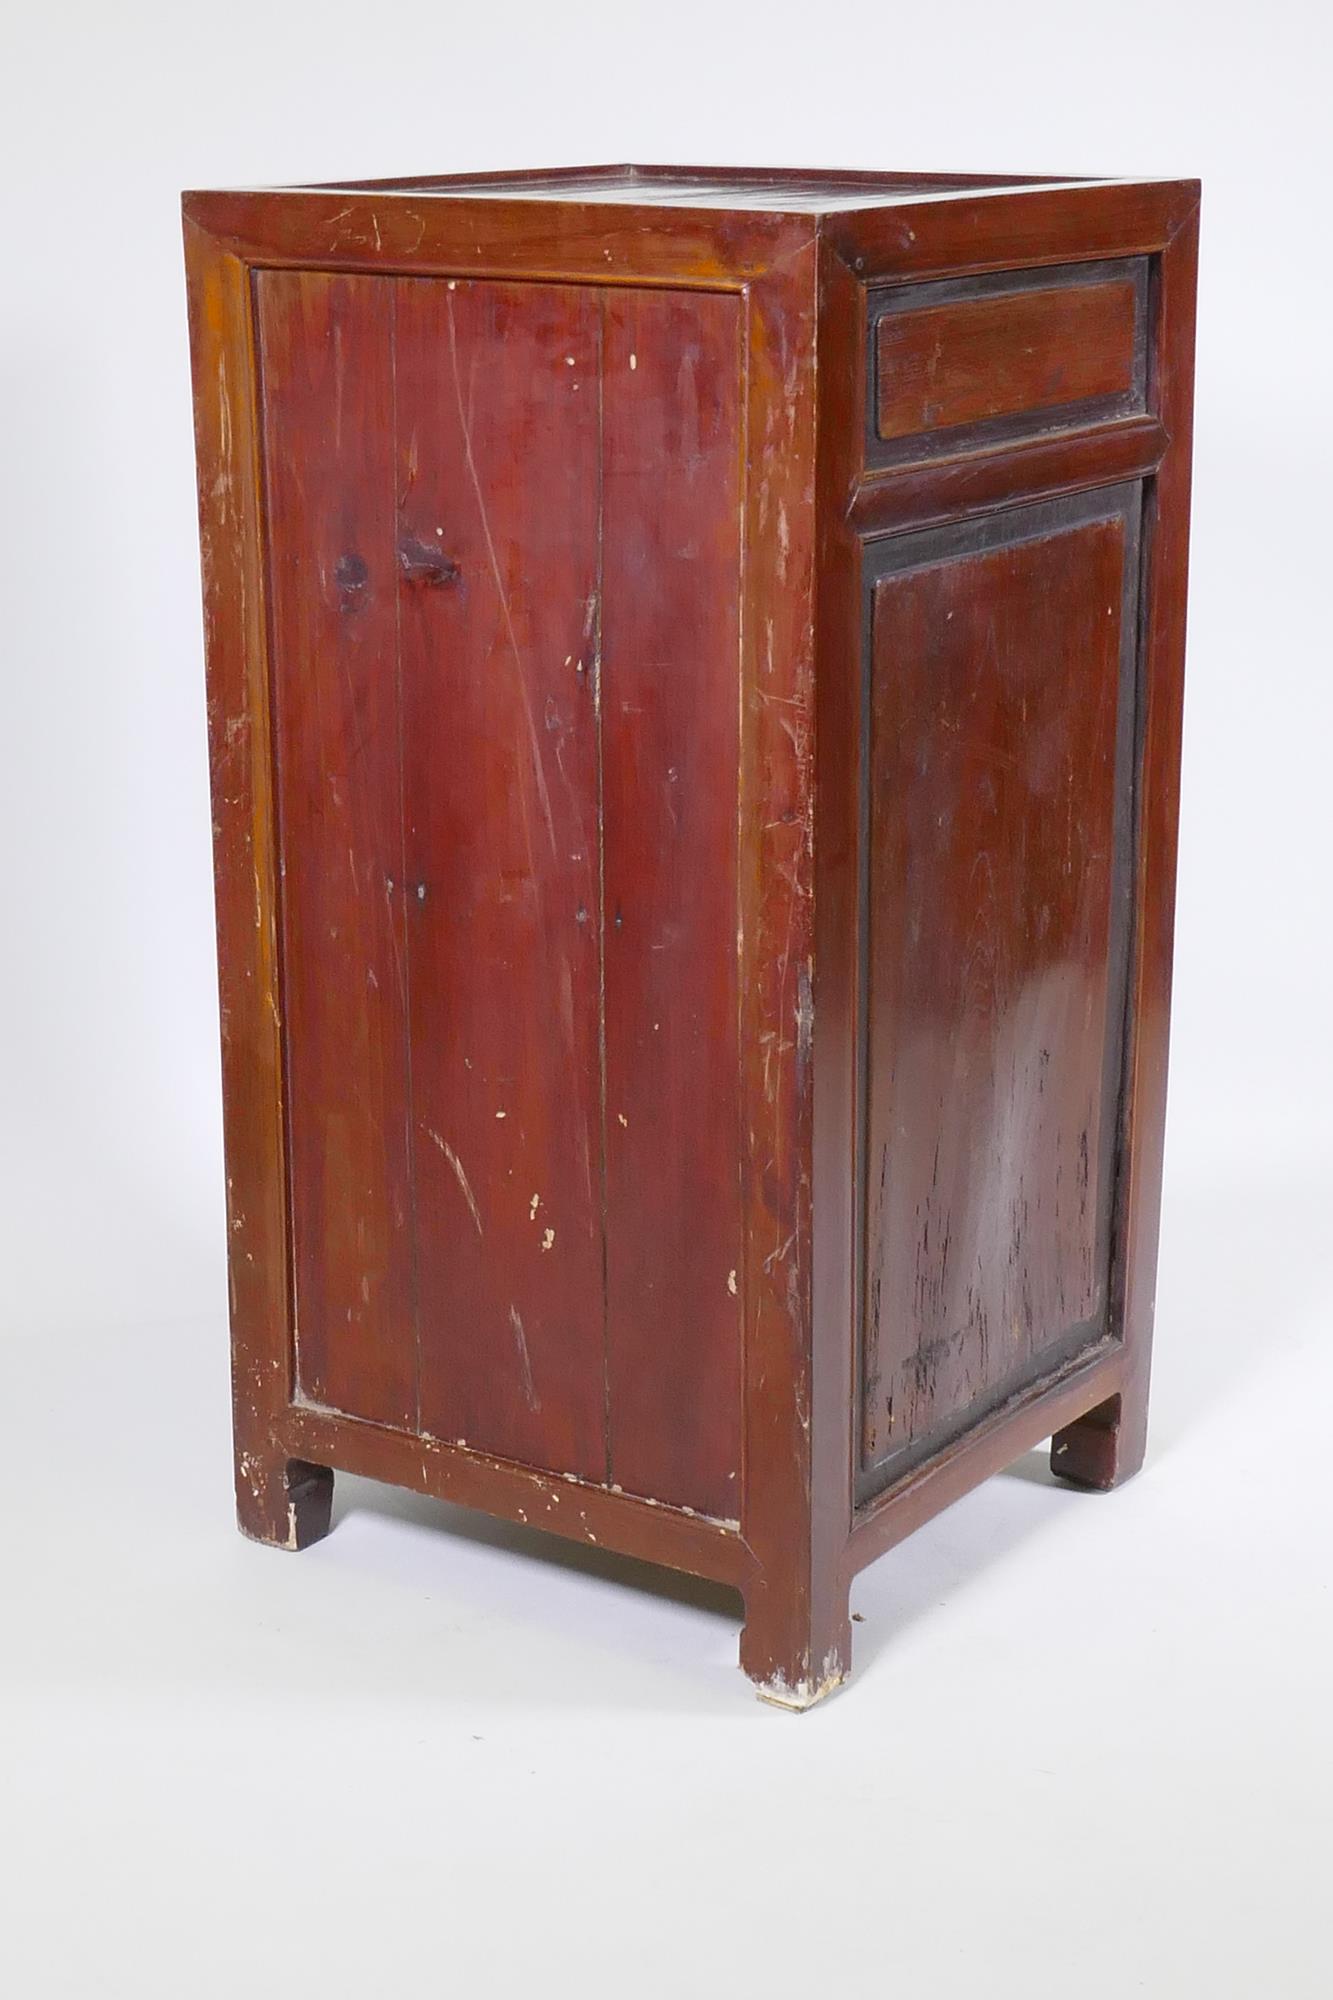 A Chinese lacquered wood cabinet with a single drawer, 44 x 44cm, 86cm high - Image 6 of 6